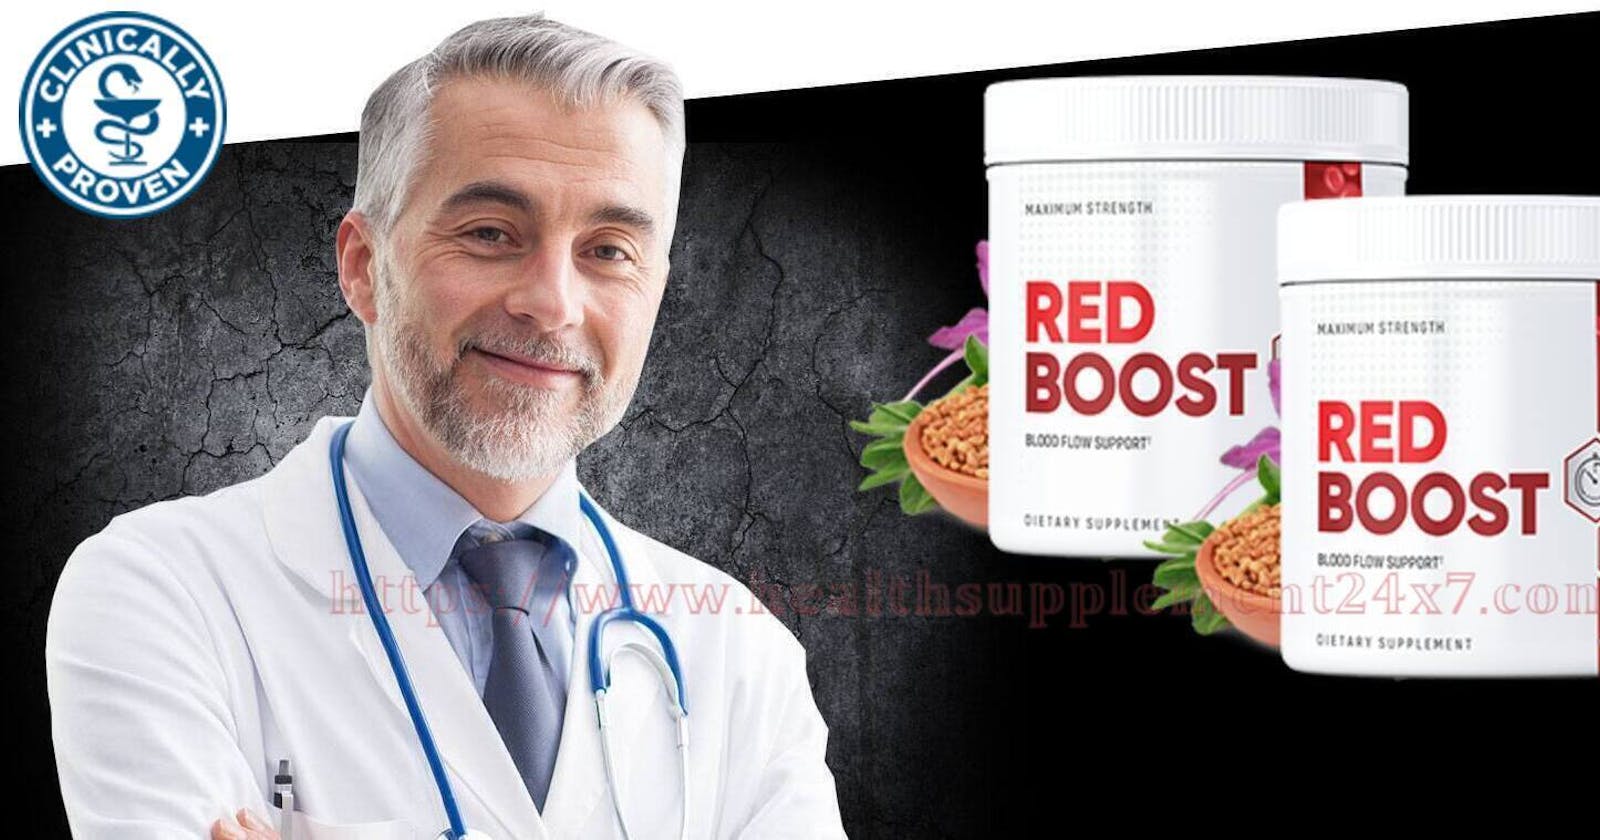 Hard Wood Tonic Red Boost Reviews Most Potent, Fast-Acting Formula For Increasing Male Sexual Performance(Work Or Hoax)